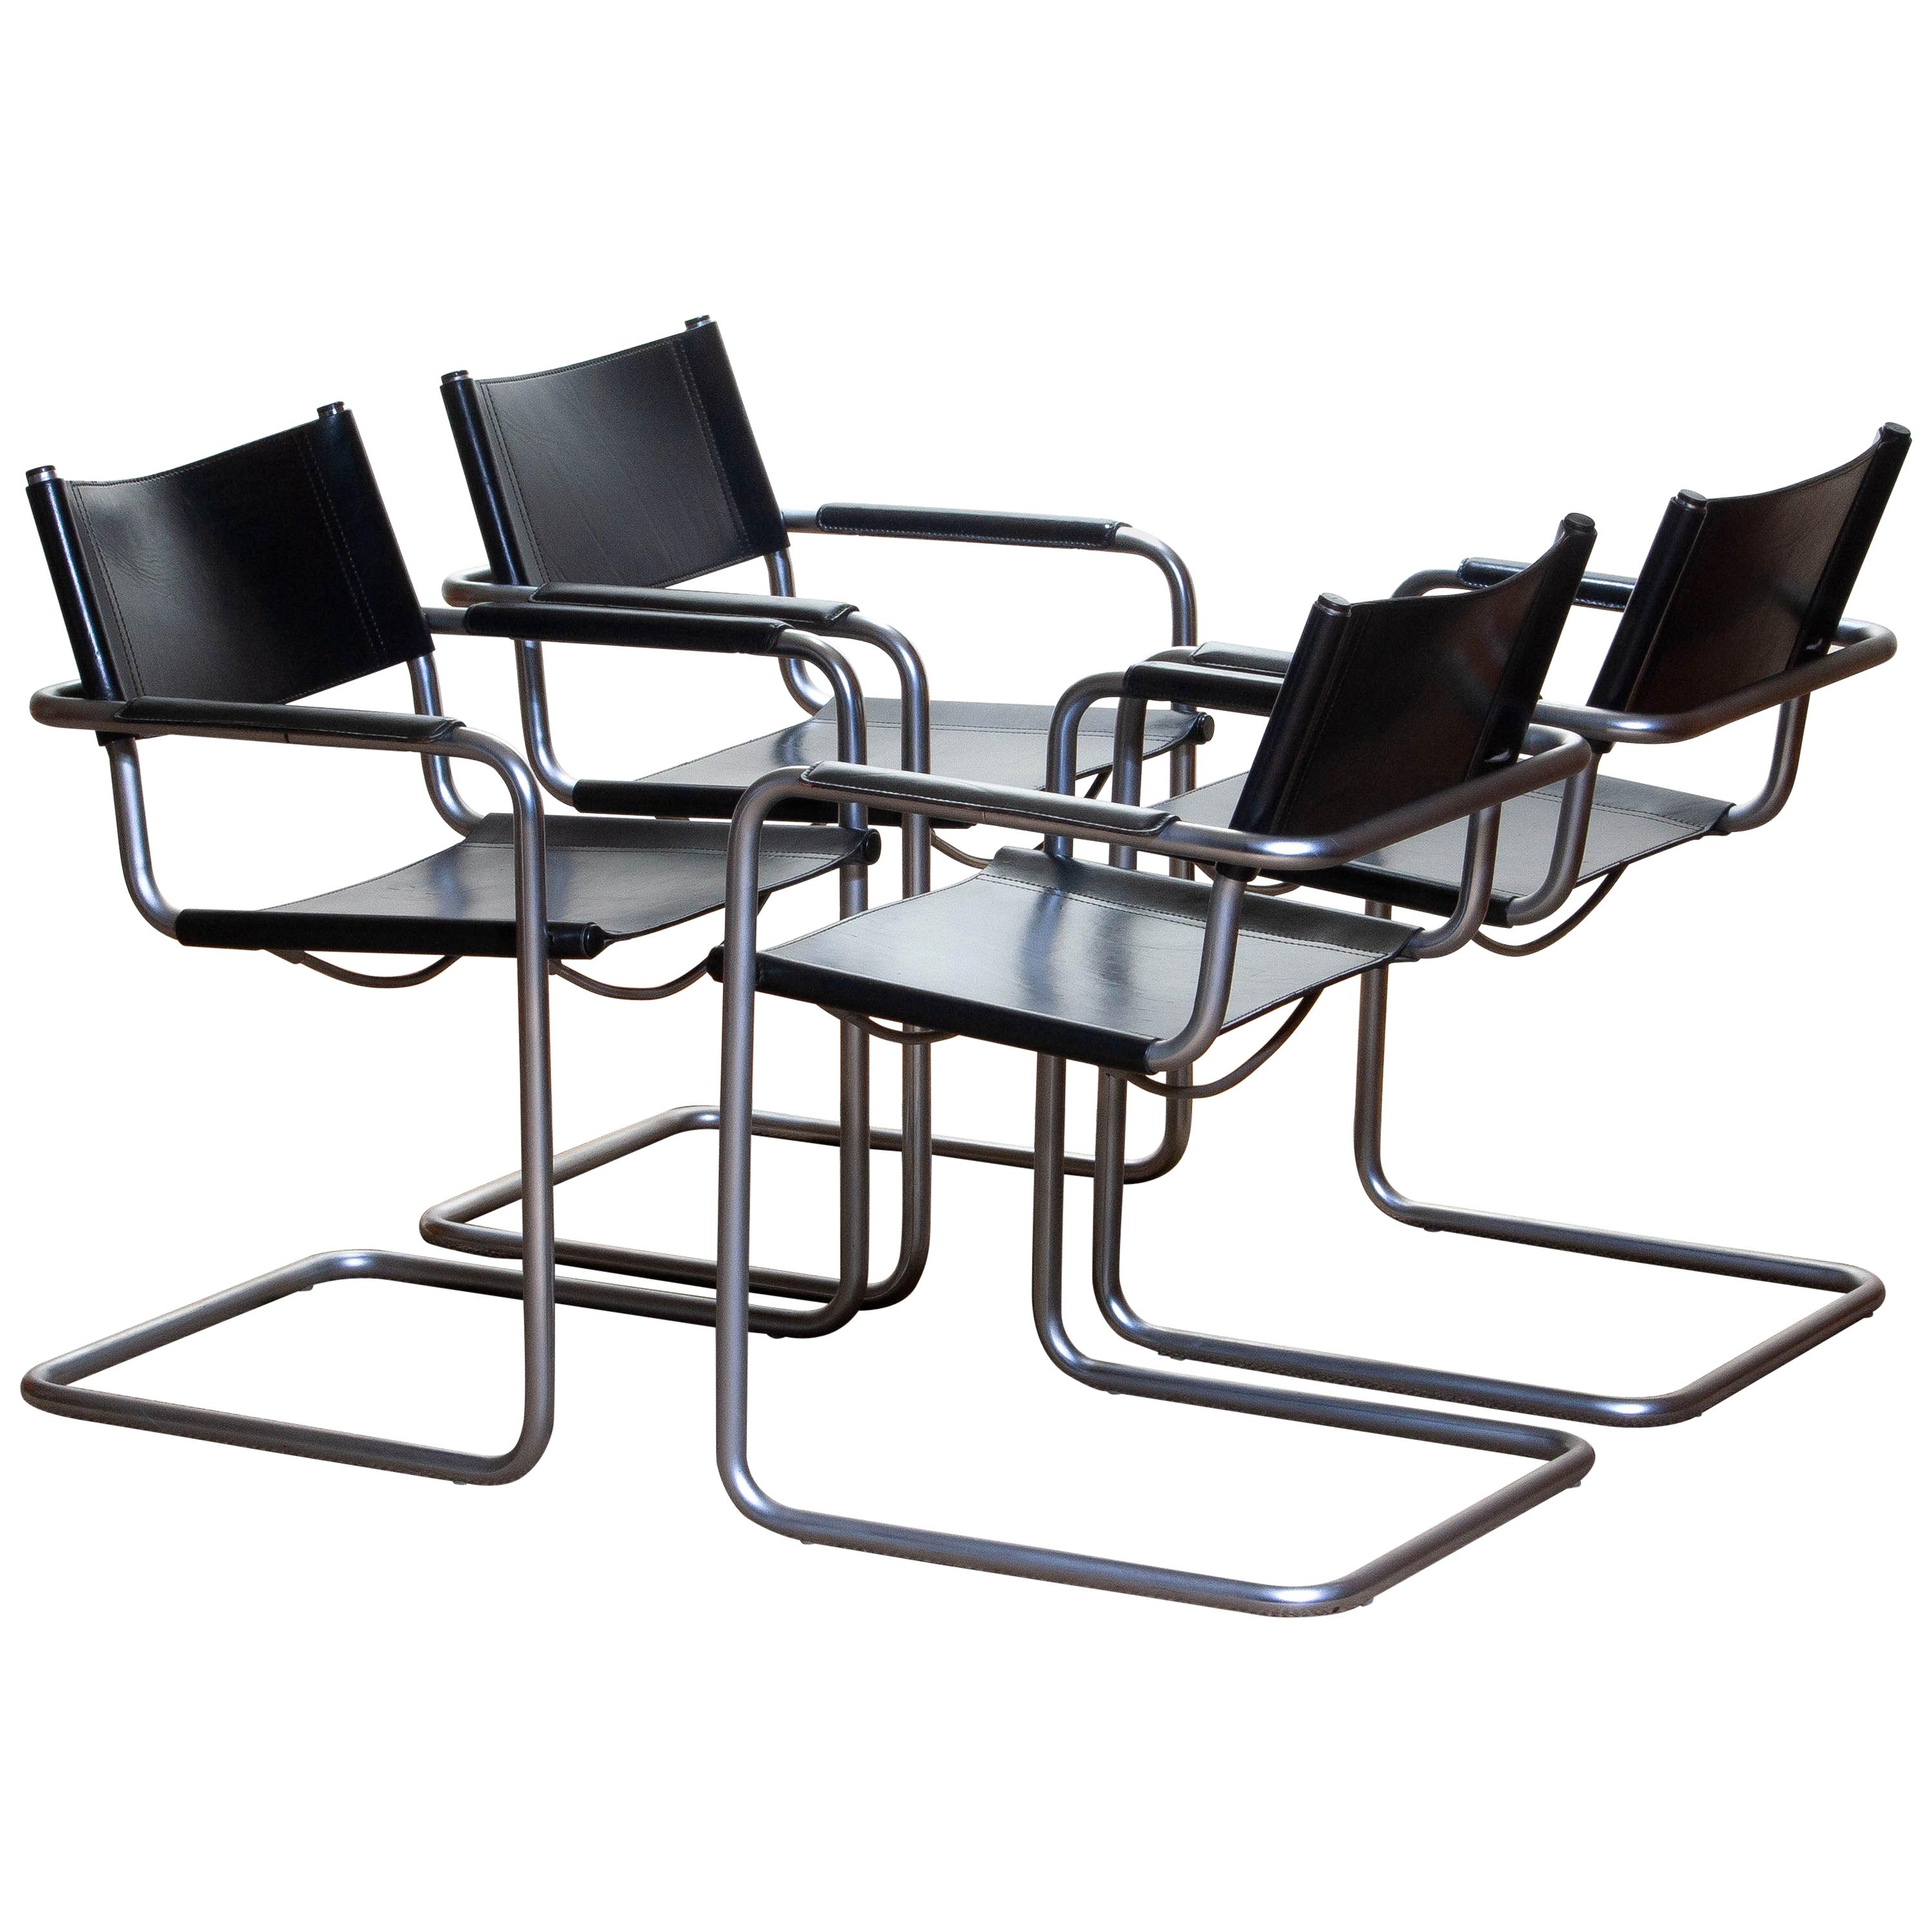 Italian 1970s, Set of Four MG5 Black Leather Dining / Office Chairs by Matteo Grassi